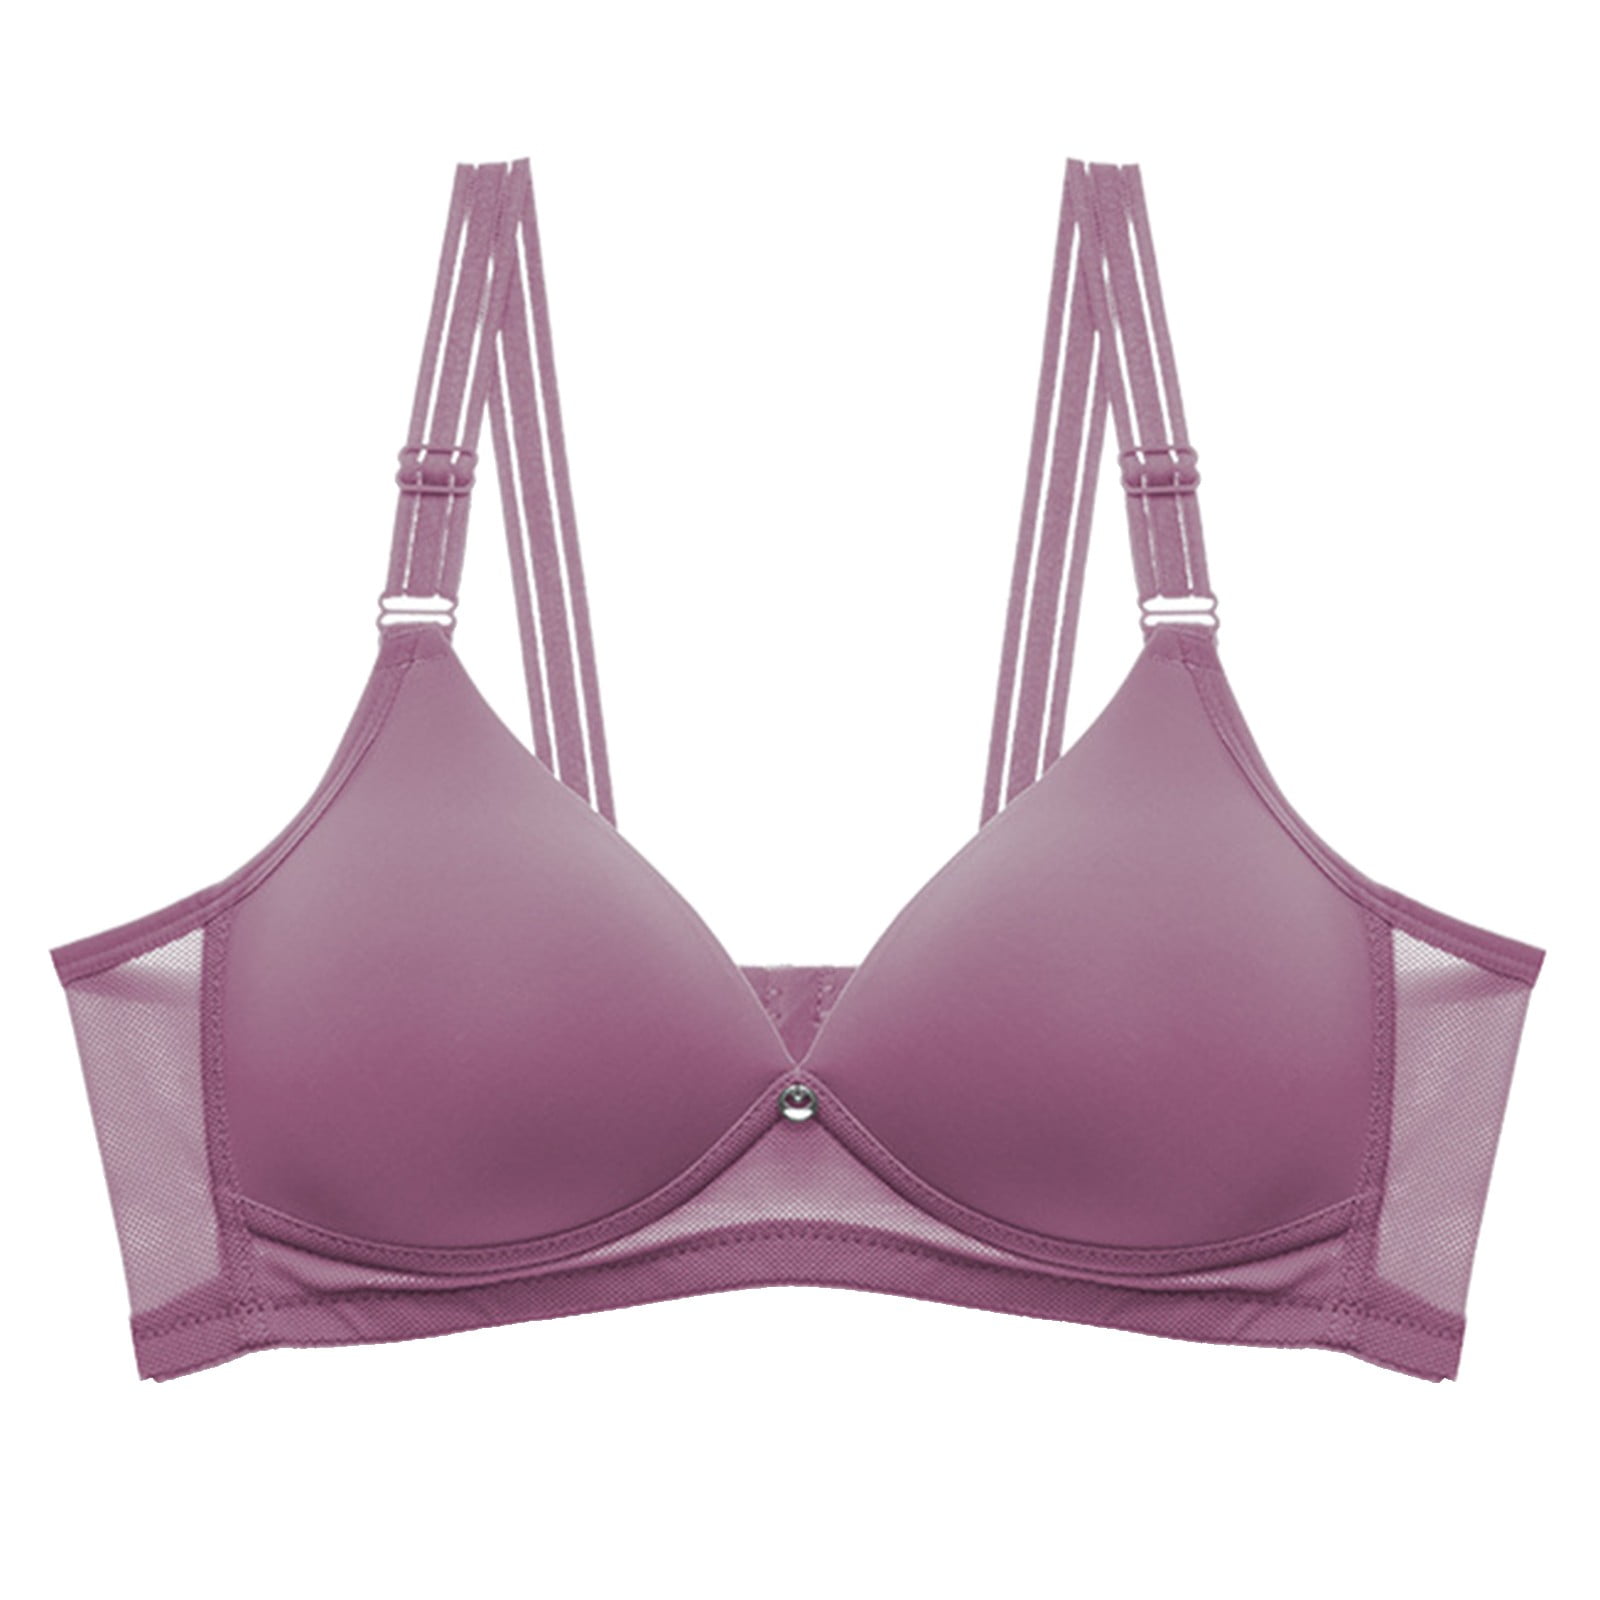 Quealent Everyday Bras Women's Seamless Stretch Wireless Lightly Lined  Convertible Comfort Bra (Pink,S) 